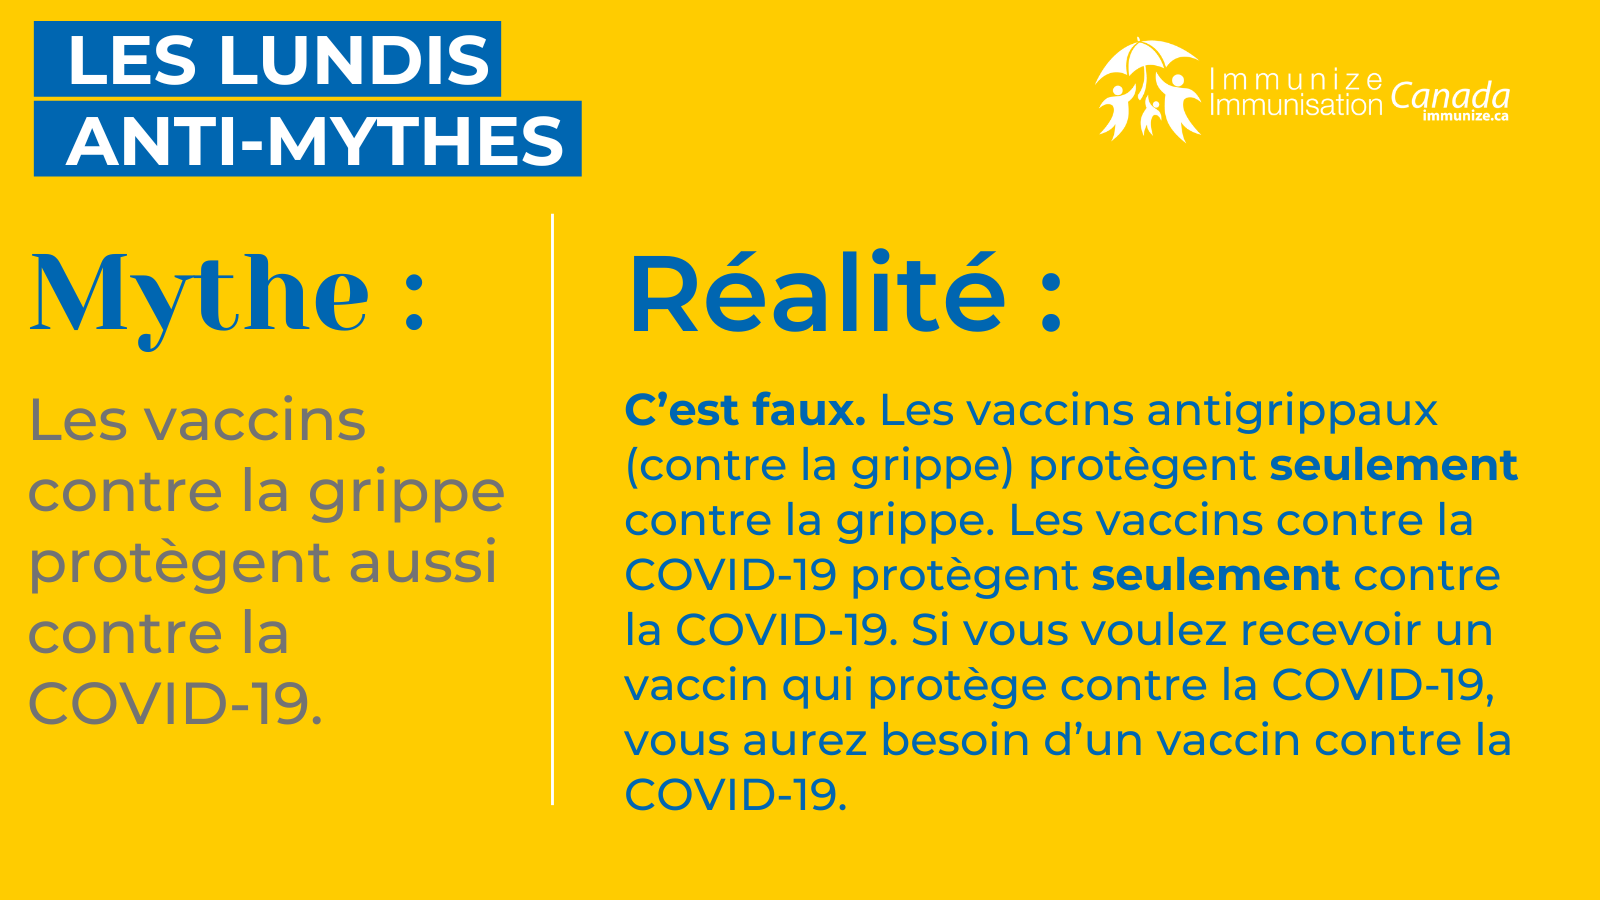 Les lundis anti-mythes - COVID-19 - image 1 pour Twitter/X